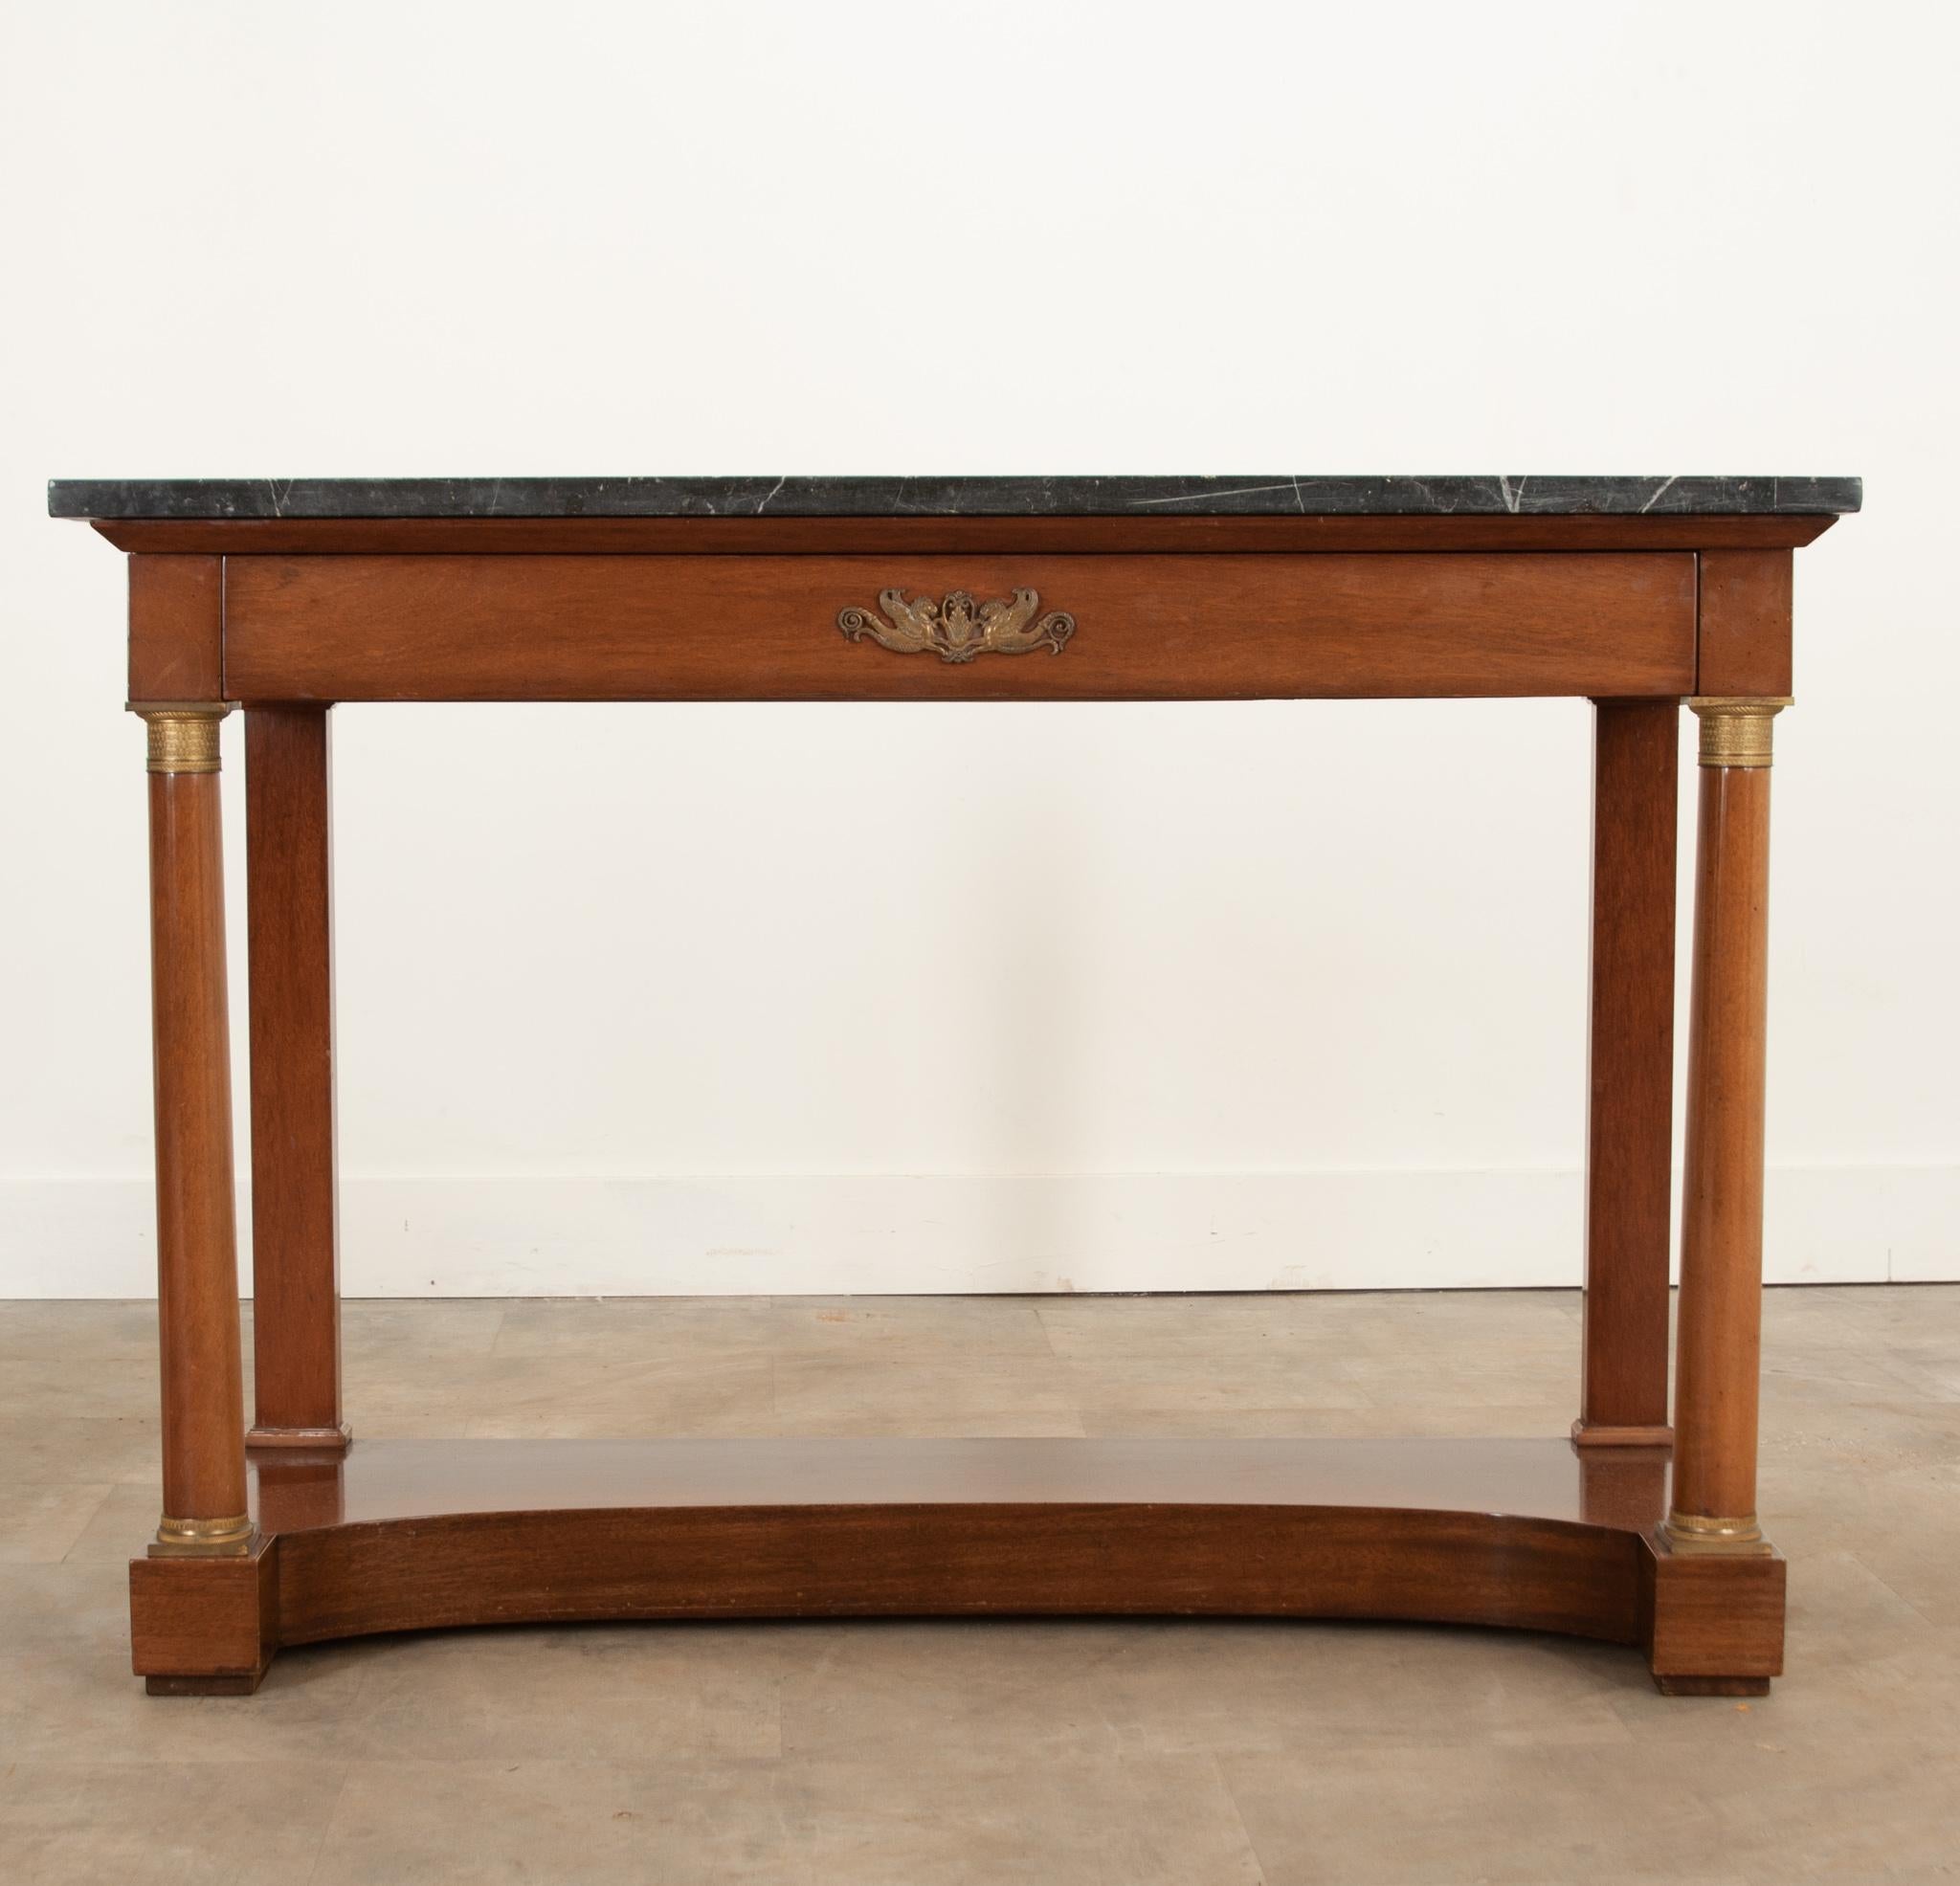 A very handsome marble topped console from France, circa 1830. Empirically styled with wonderful cast brass ormolu on the drawer front and front legs. The vibrant mahogany is in wonderful antique condition and compliments the top nicely. A concave